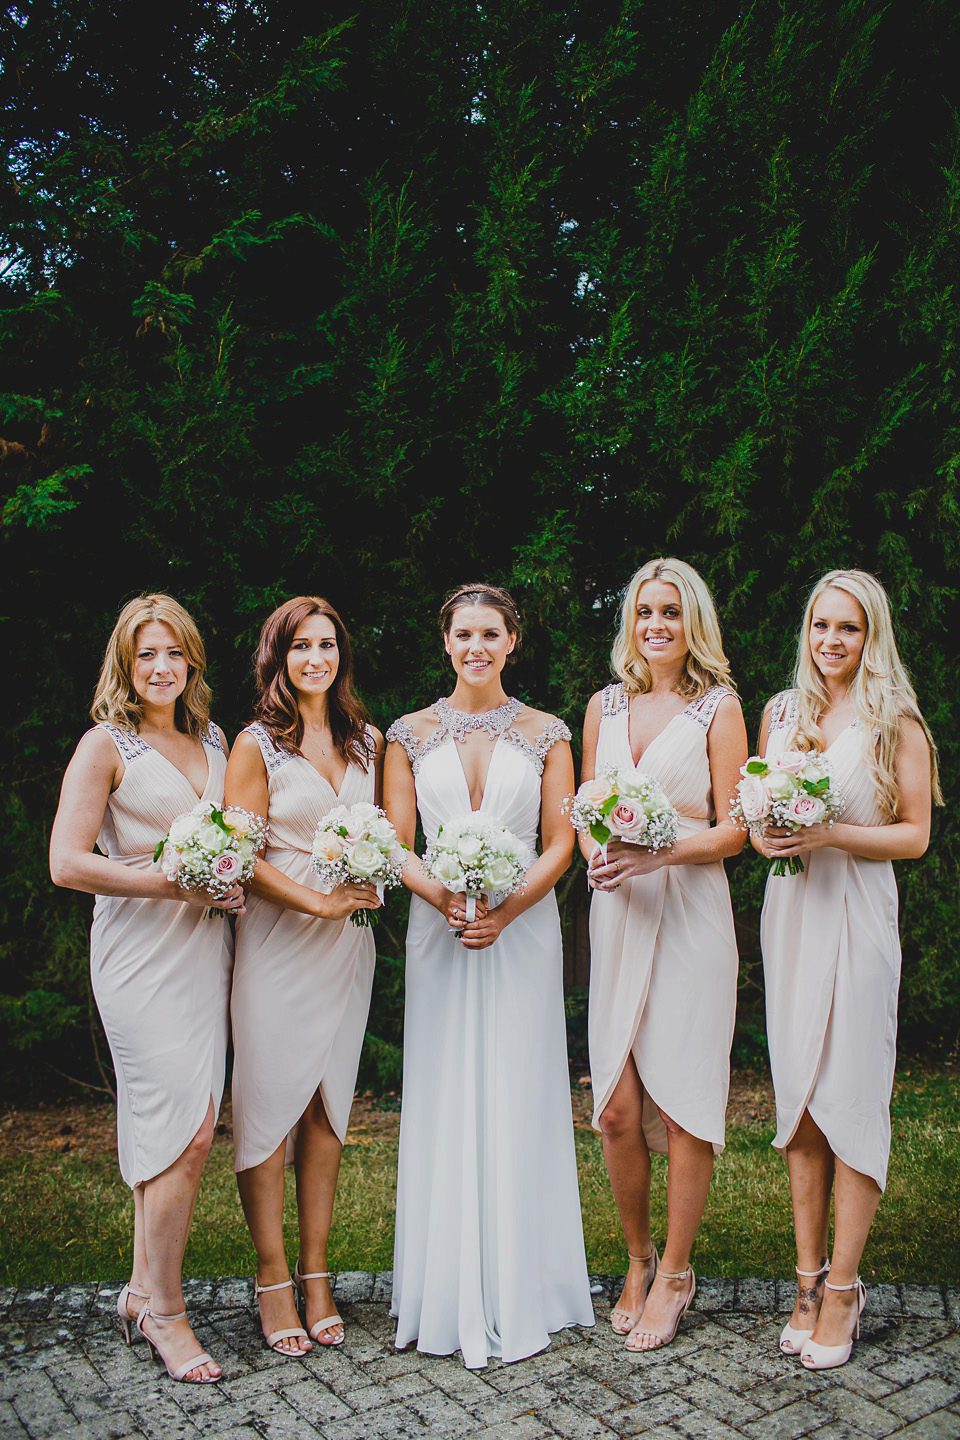 A Grecian style dress for a glamorous English country house wedding. Photography by Jonny MP.